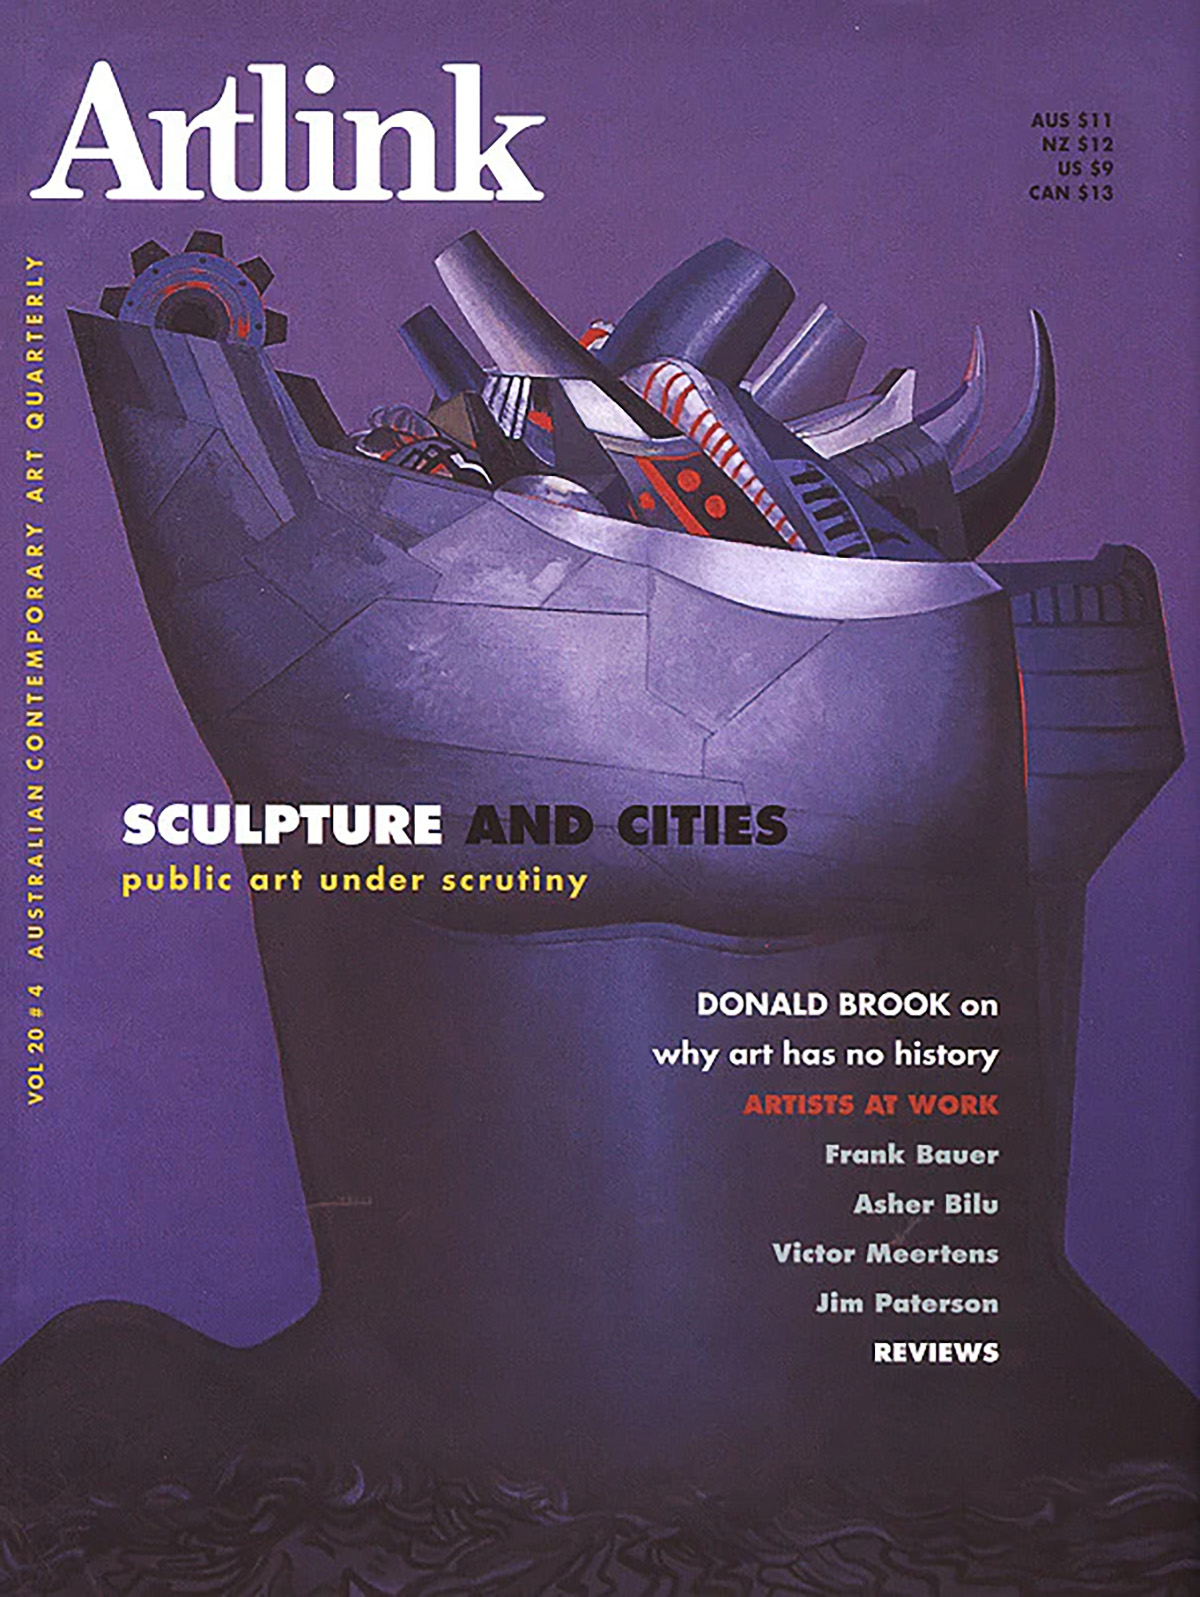 Issue 20:4 | December 2000 | Sculpture and Cities